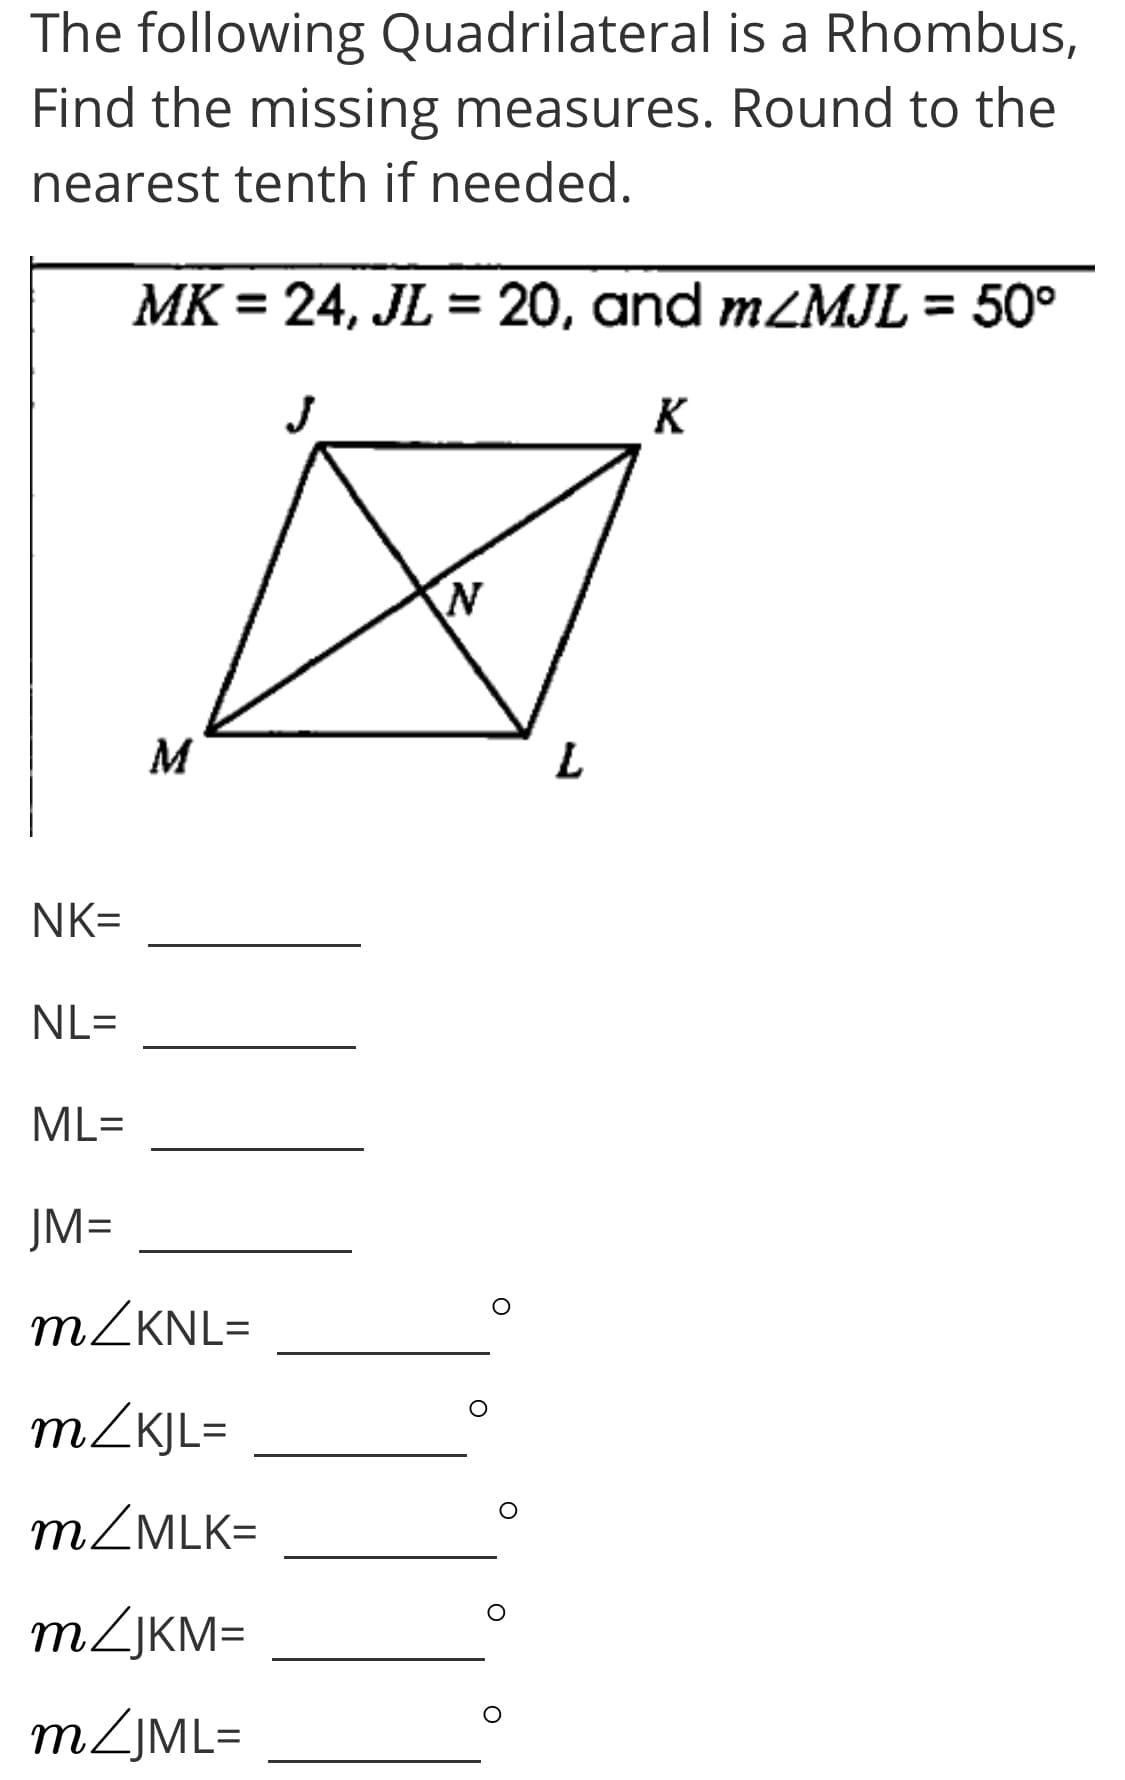 The following Quadrilateral is a Rhombus,
Find the missing measures. Round to the
nearest tenth if needed.
MK
= 24, JL = 20, and mZMJL = 50°
K
M
NK=
NL=
ML=
JM=
MZKNL=
m/KJL=
MZMLK=
MZJKM=
m/JML=
